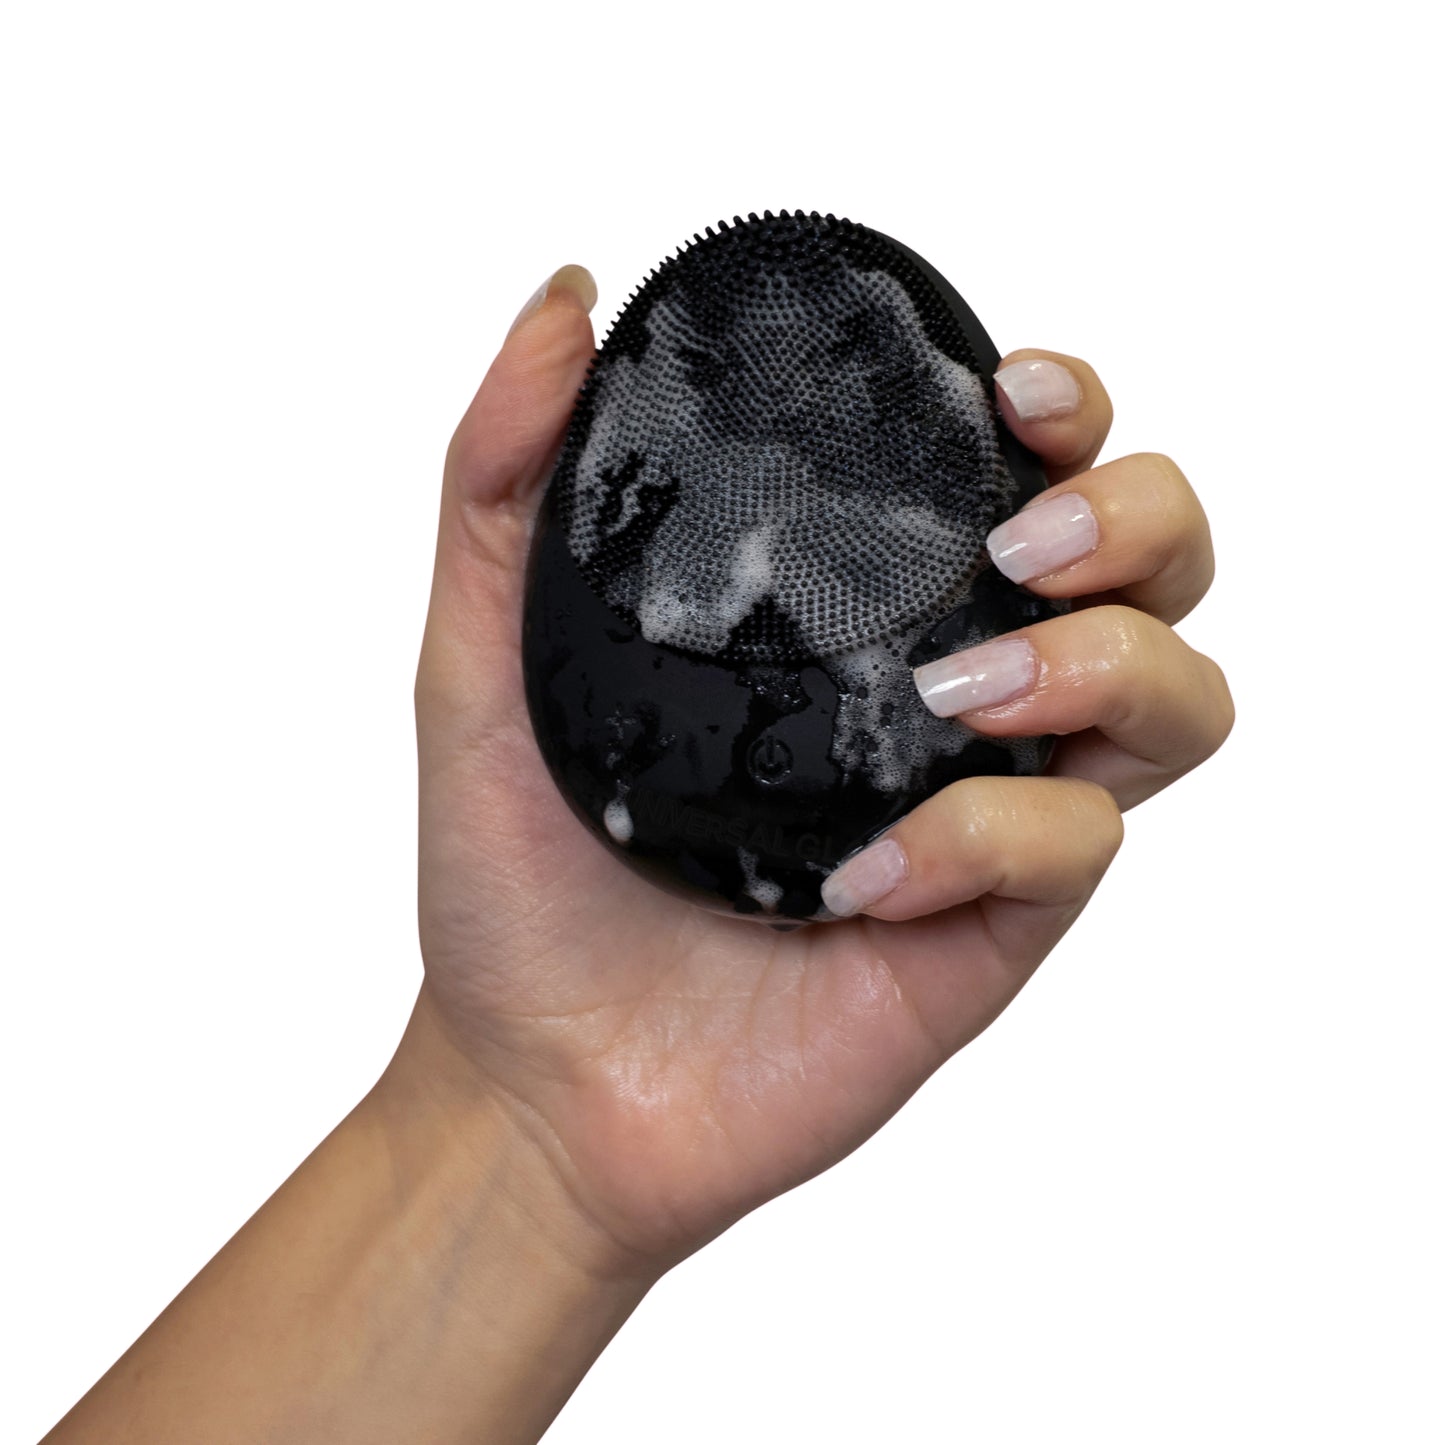 Black silicone cleansing brush, with hand